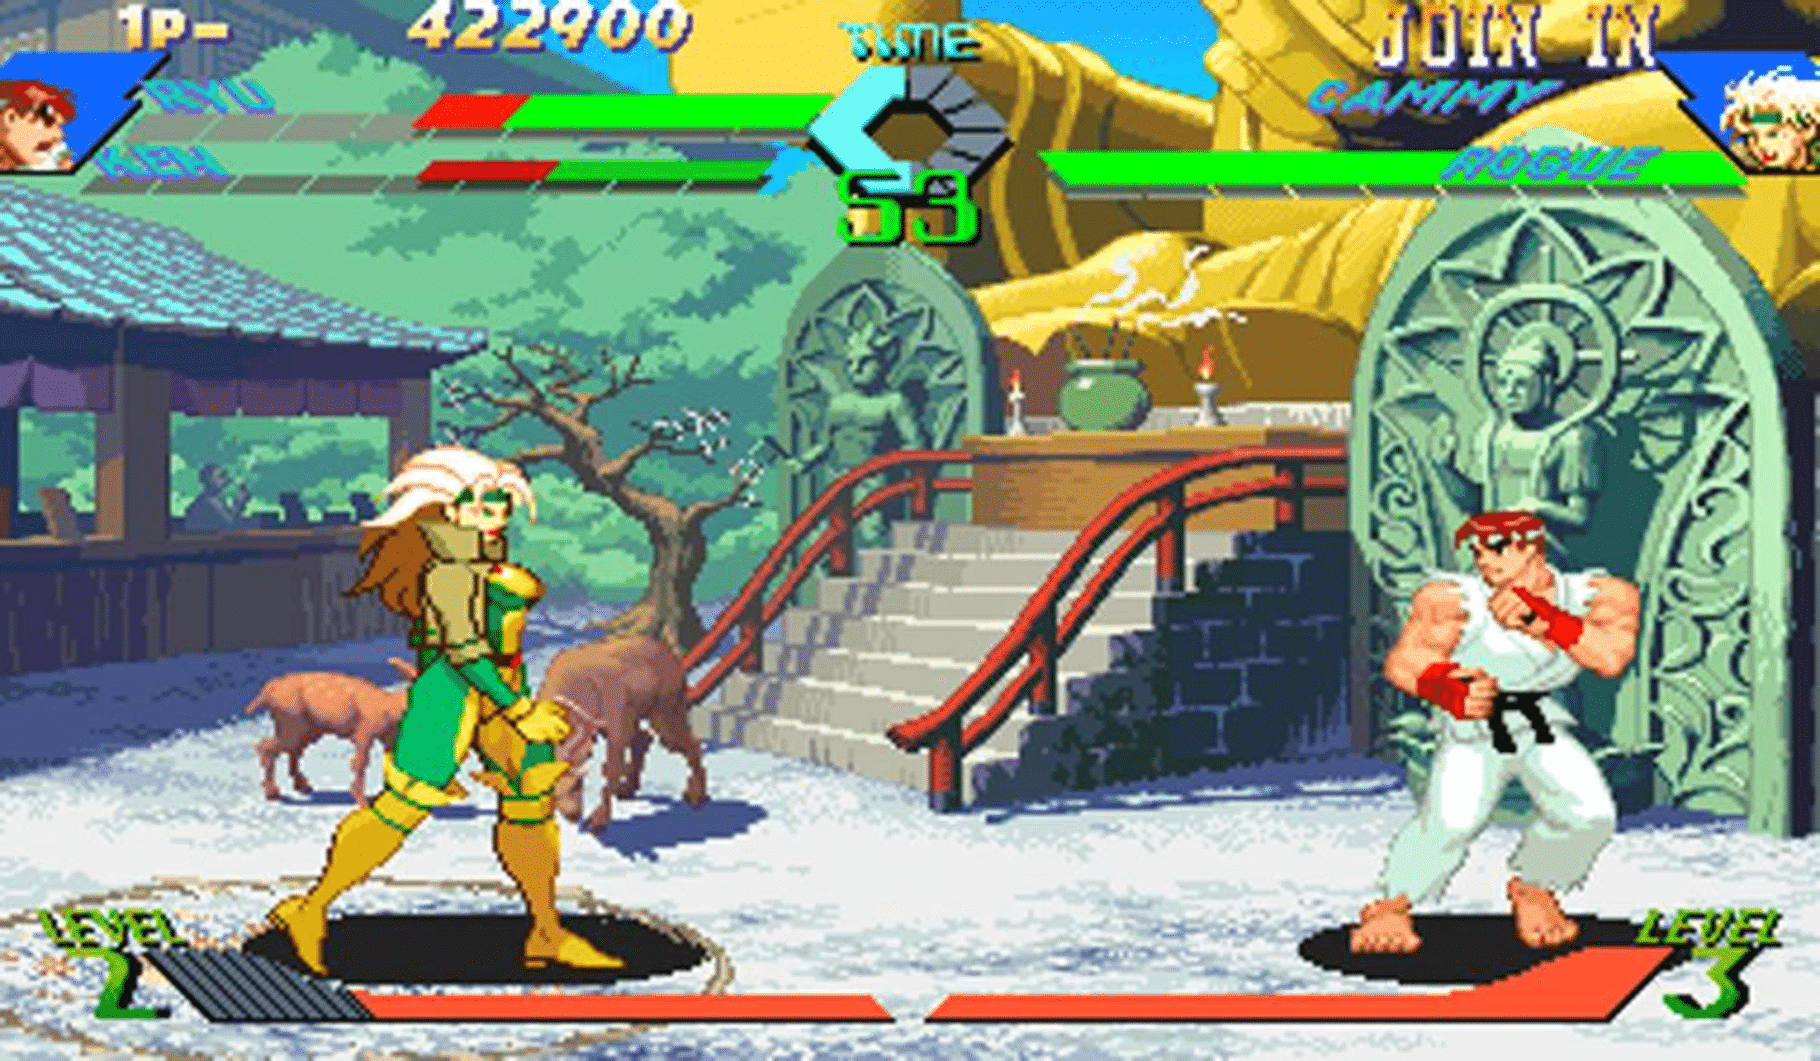 X-Men vs. Street Fighter3.63.6X-Men vs. Street FighterLog a Game